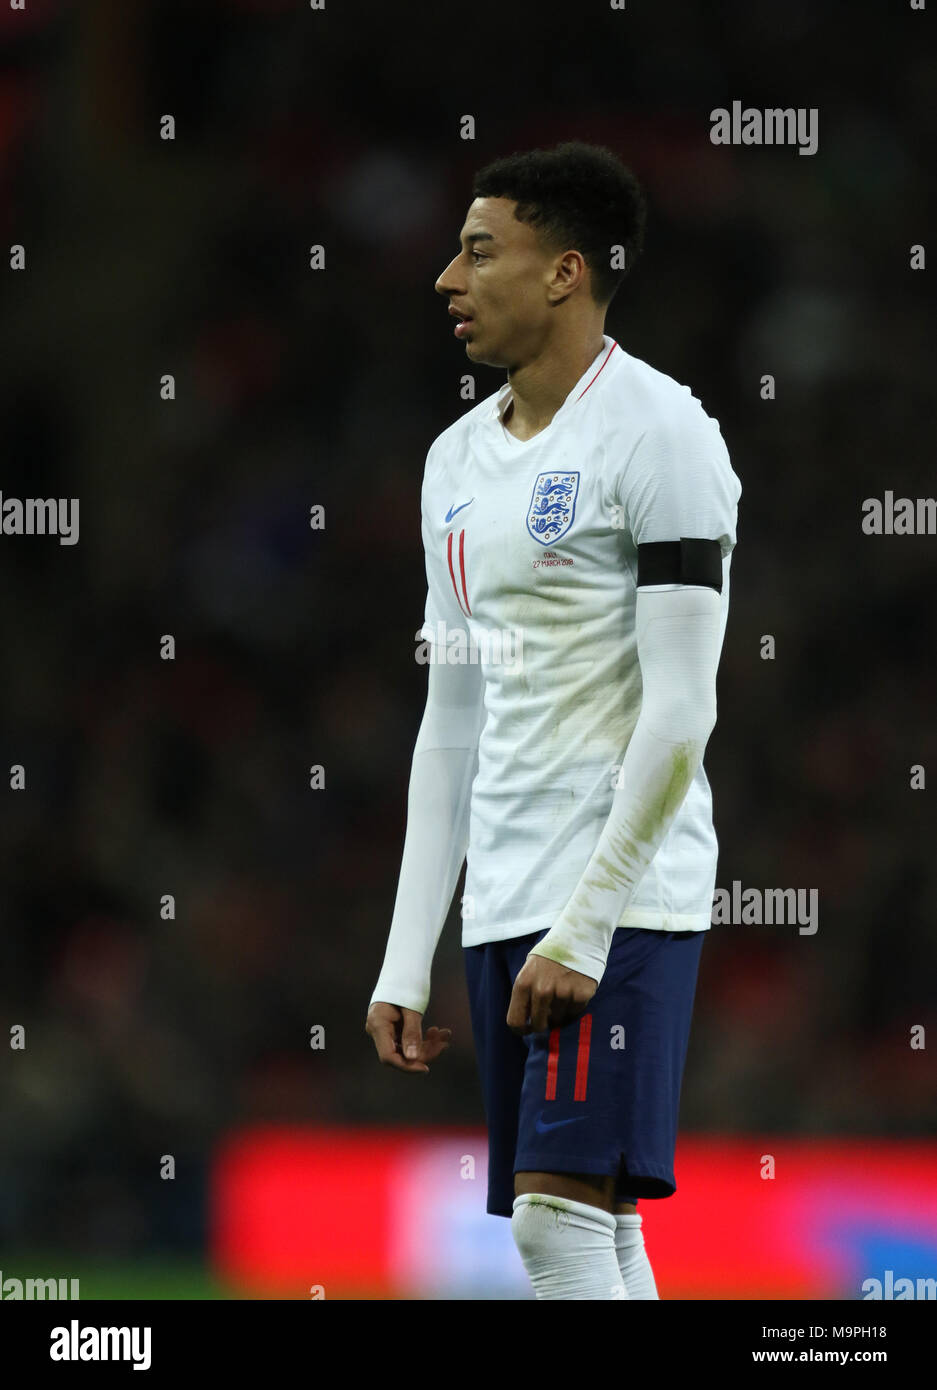 London, UK. 27th March, 2018. Jesse Lingard (E) at the England v Italy International Friendly football match, at Wembley Stadium, London, on March 27, 2018. **This picture is for editorial use only** Credit: Paul Marriott/Alamy Live News Stock Photo